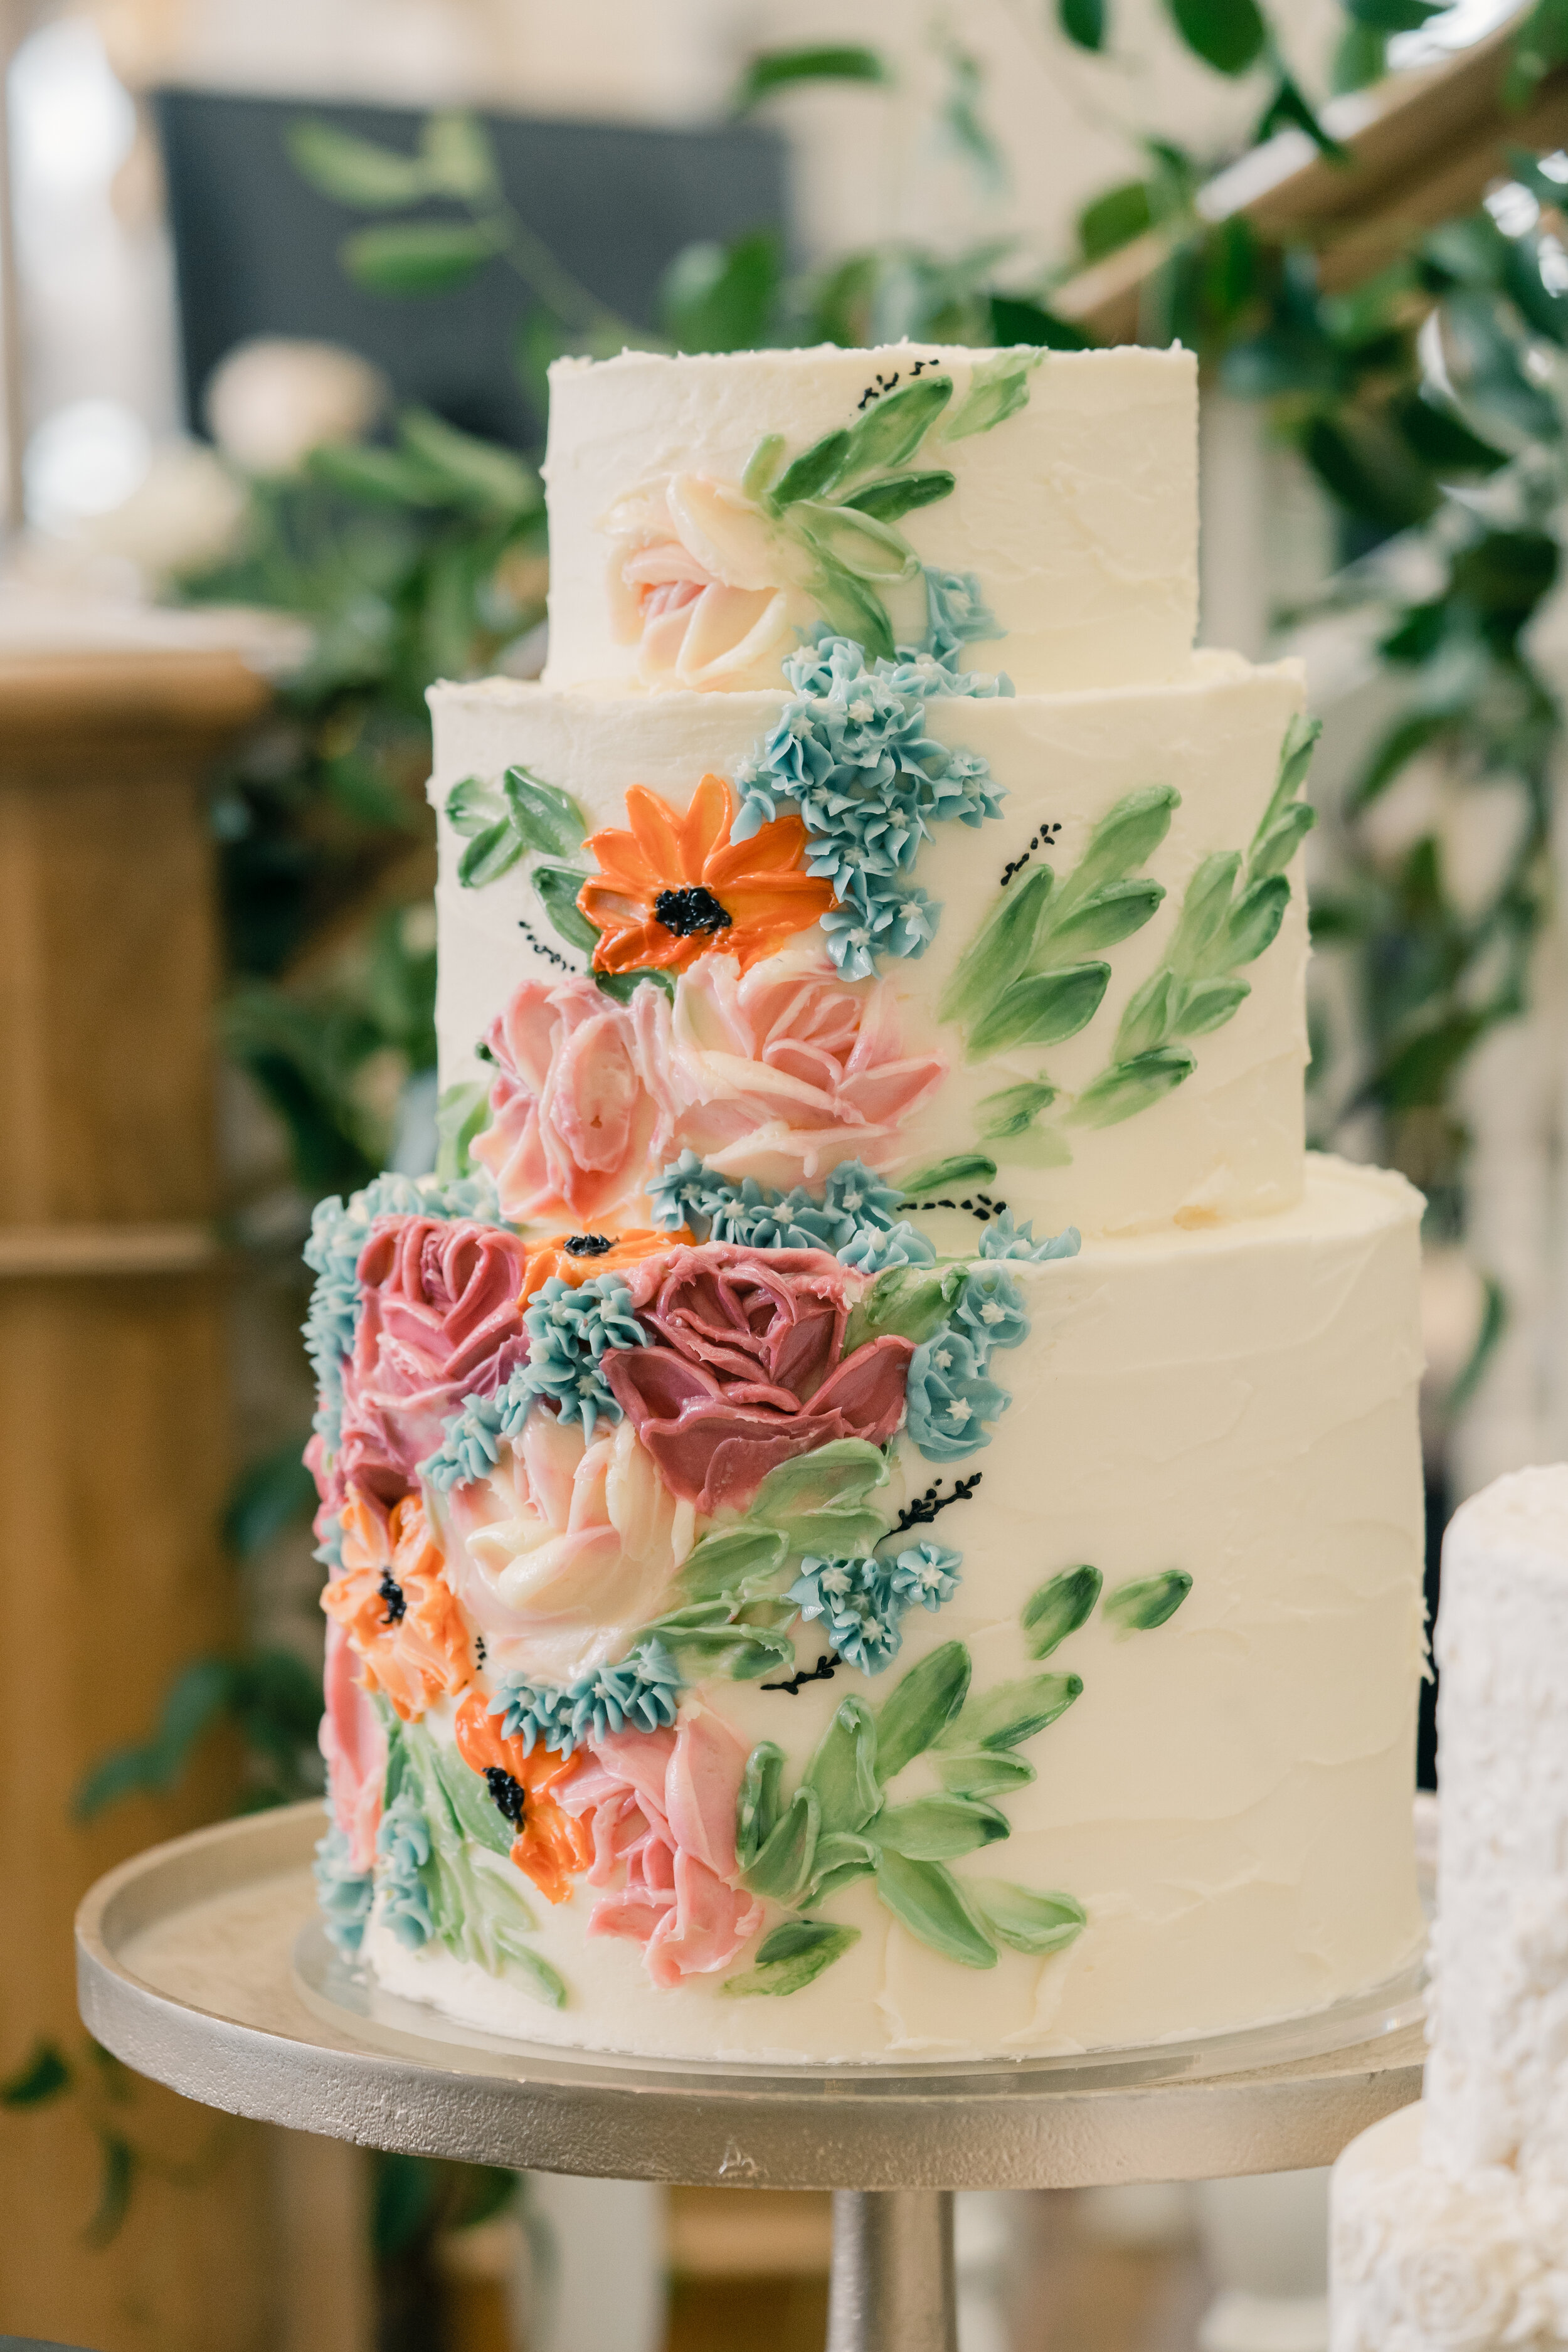 3 Tier Buttercream Wedding Cake, Southend-on-Sea – Saxon Hall, 17th August  2019 - Sticky Fingers Cake Co